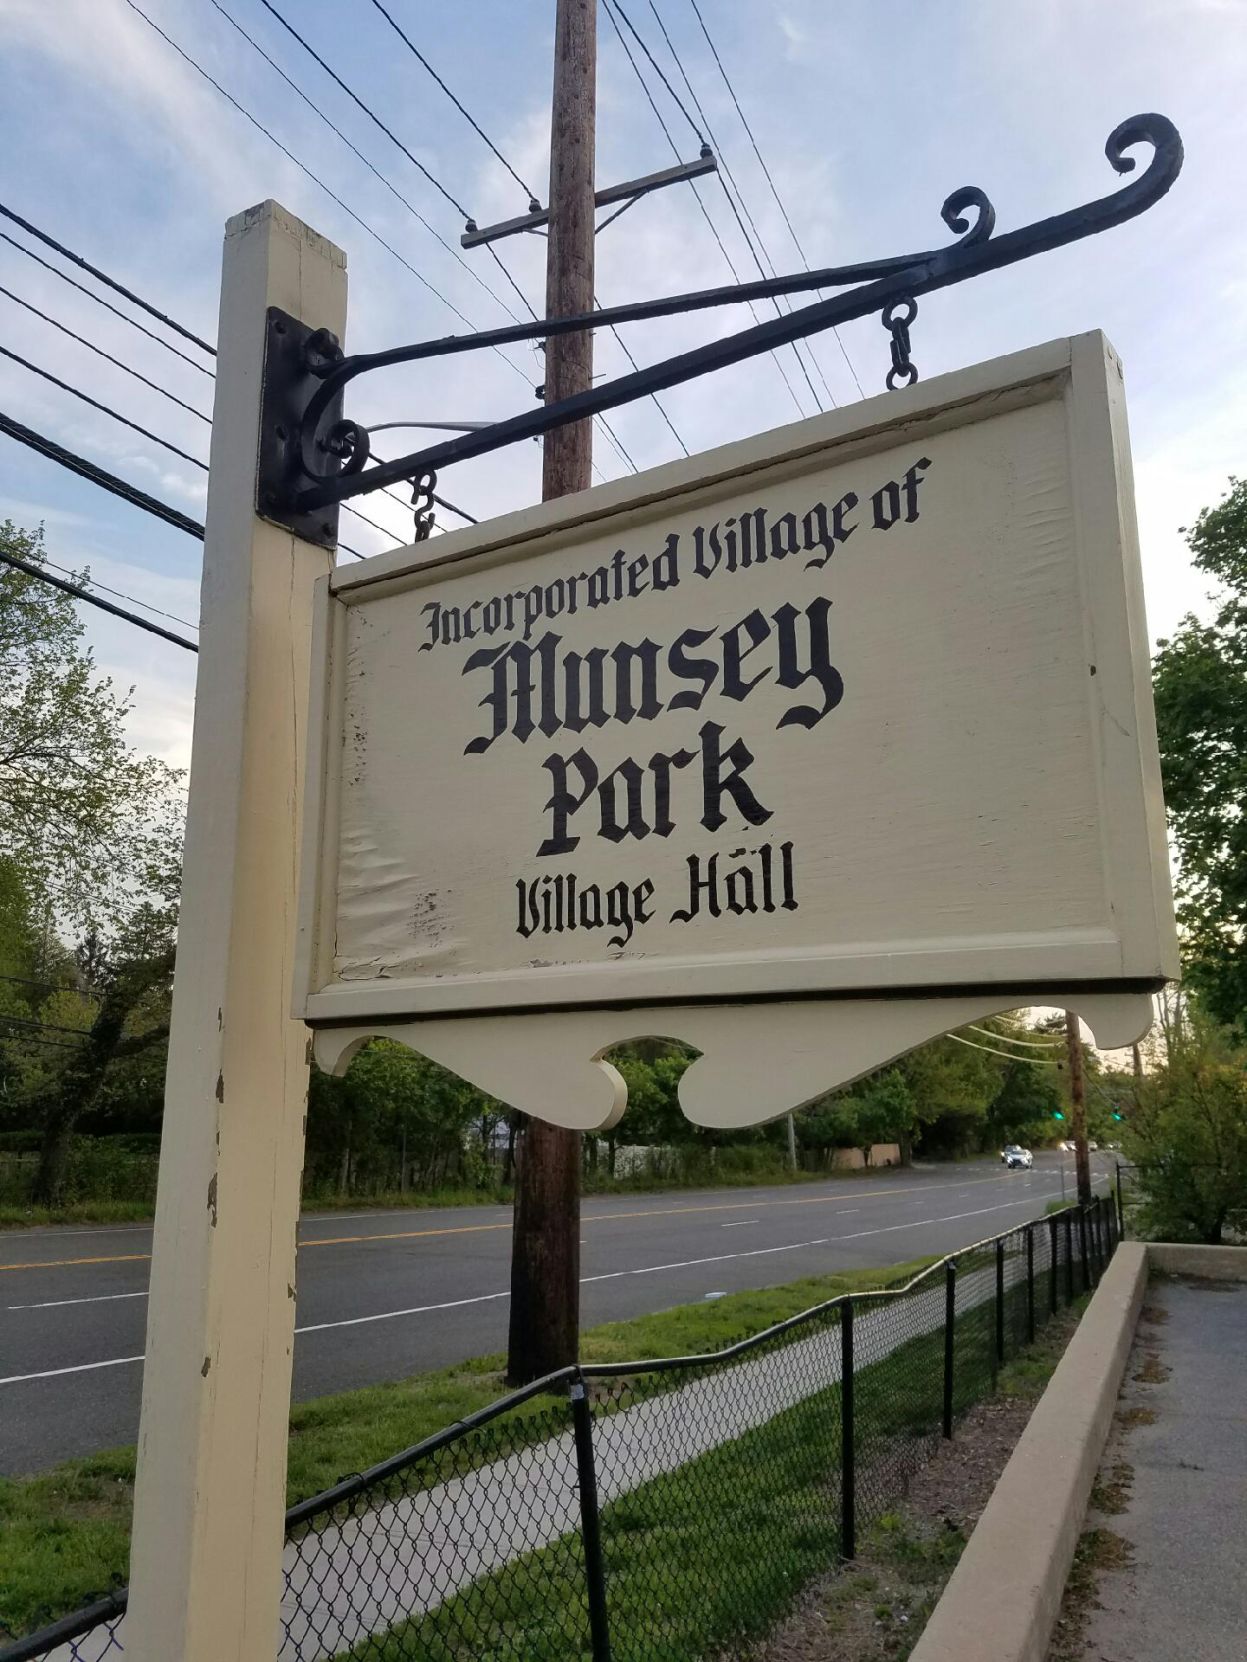 Munsey Park hikes taxes 2% to pay for roadwork